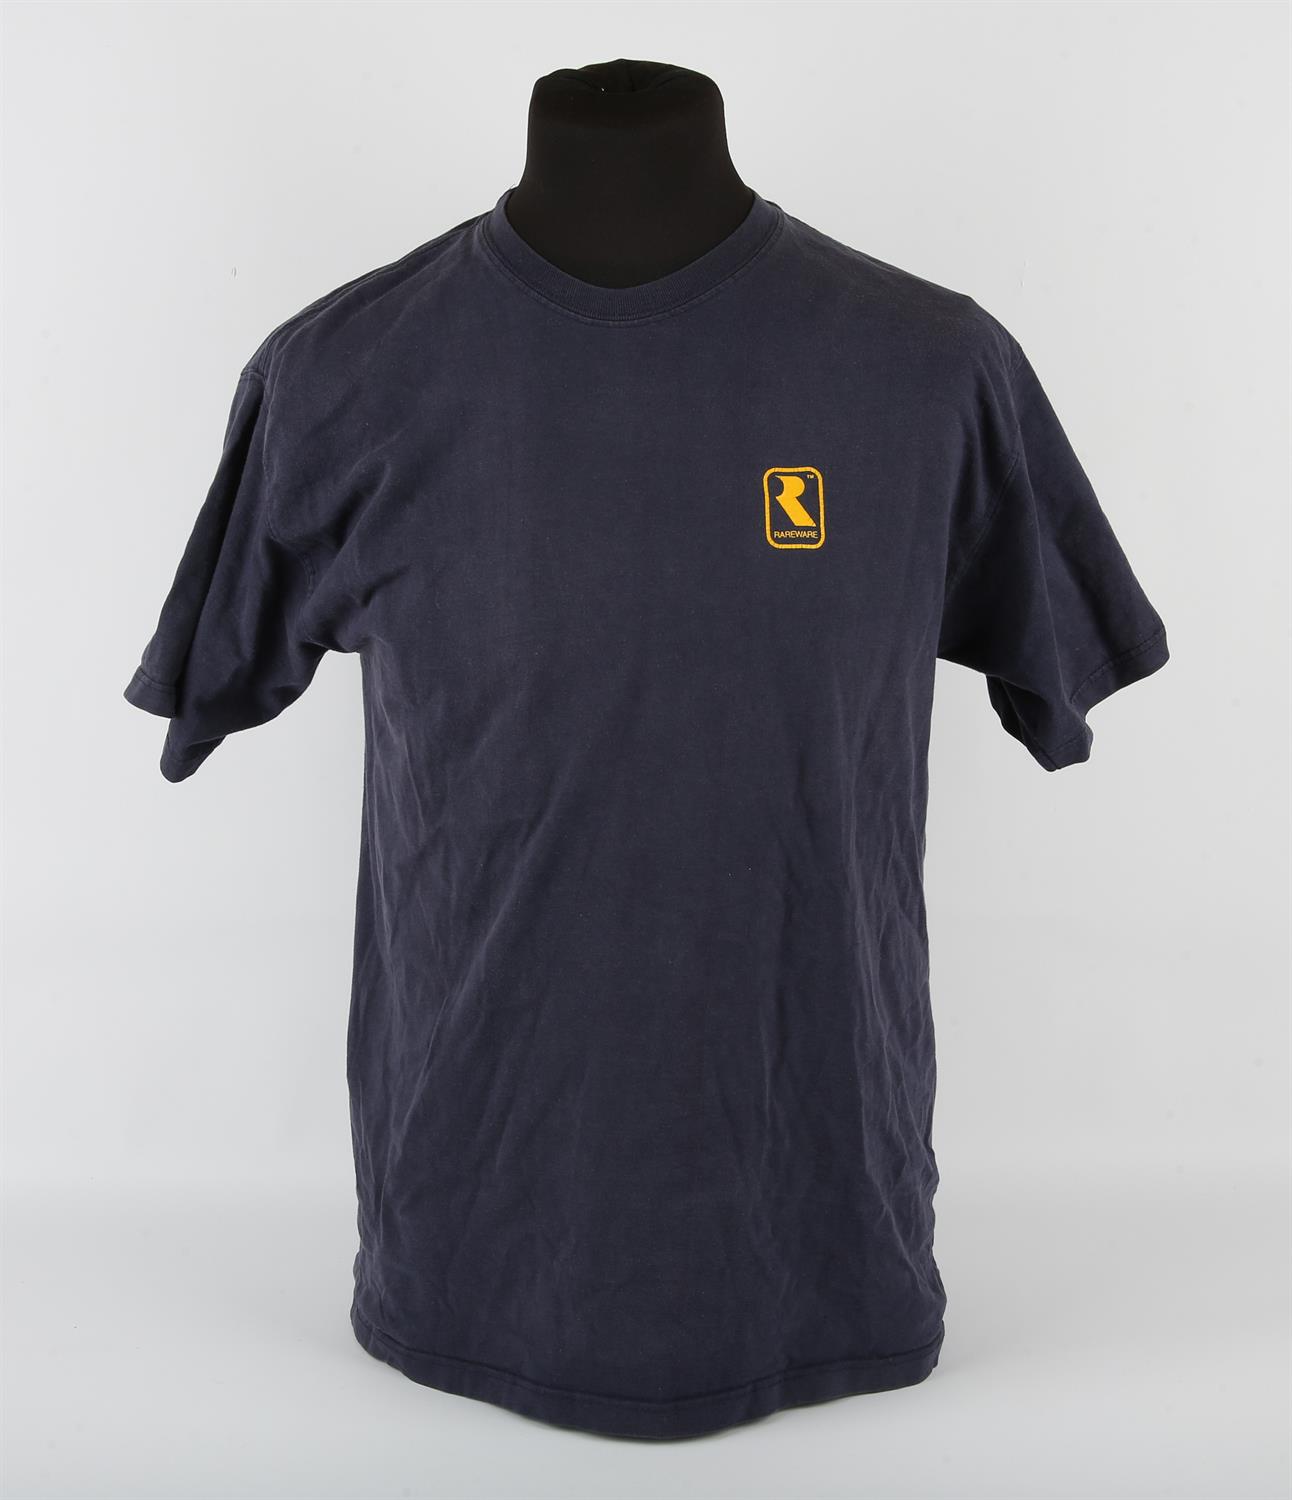 Rareware - Staff T-Shirt, Navy Blue, Size M The Rareware logo (with text) is present on the front